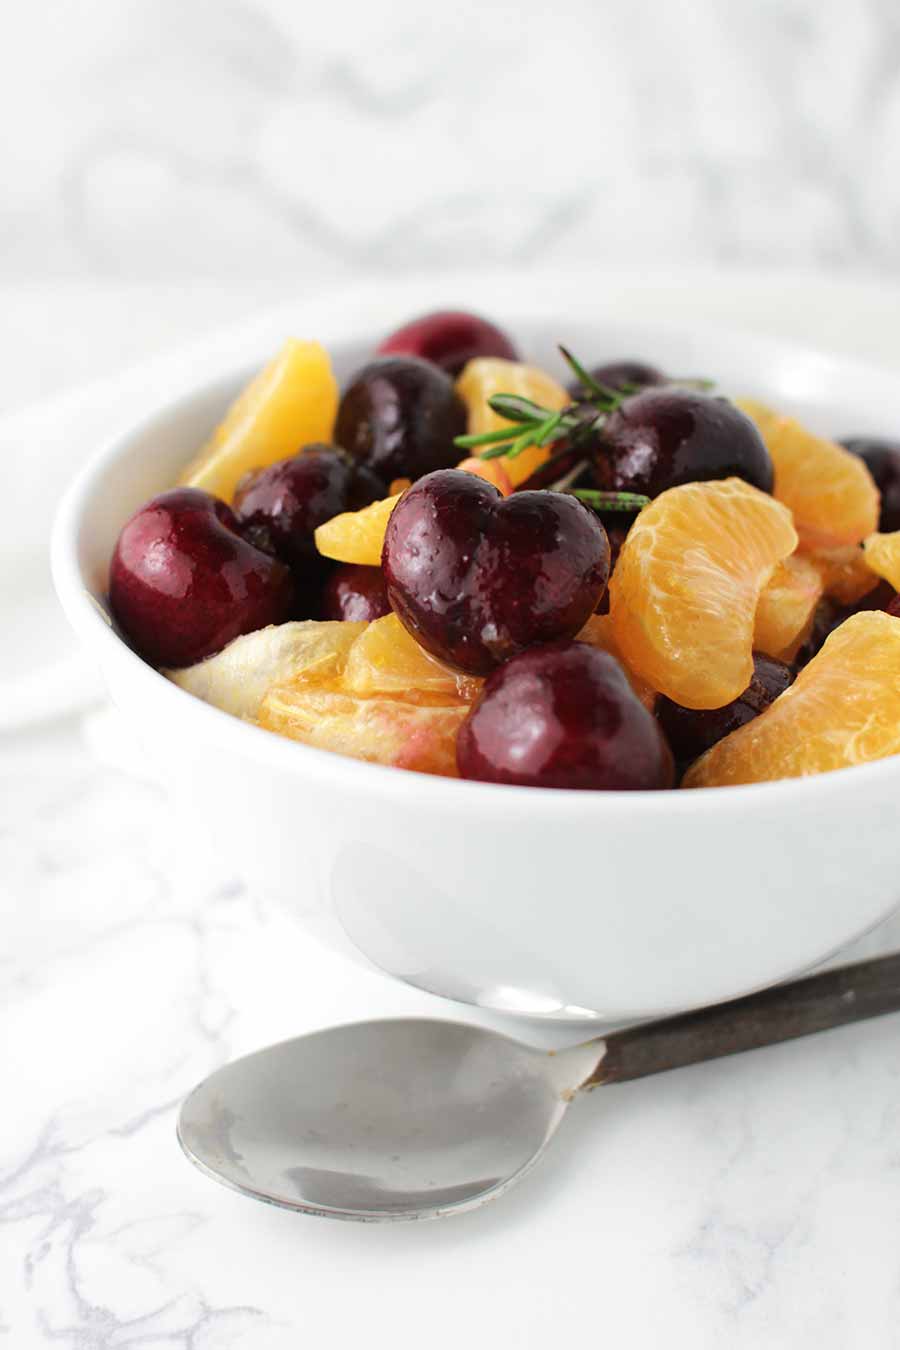 Clementine Fruit Salad with Cherries from acleanplate.com #aip #autoimmuneprotocol #paleo #dessert #salad